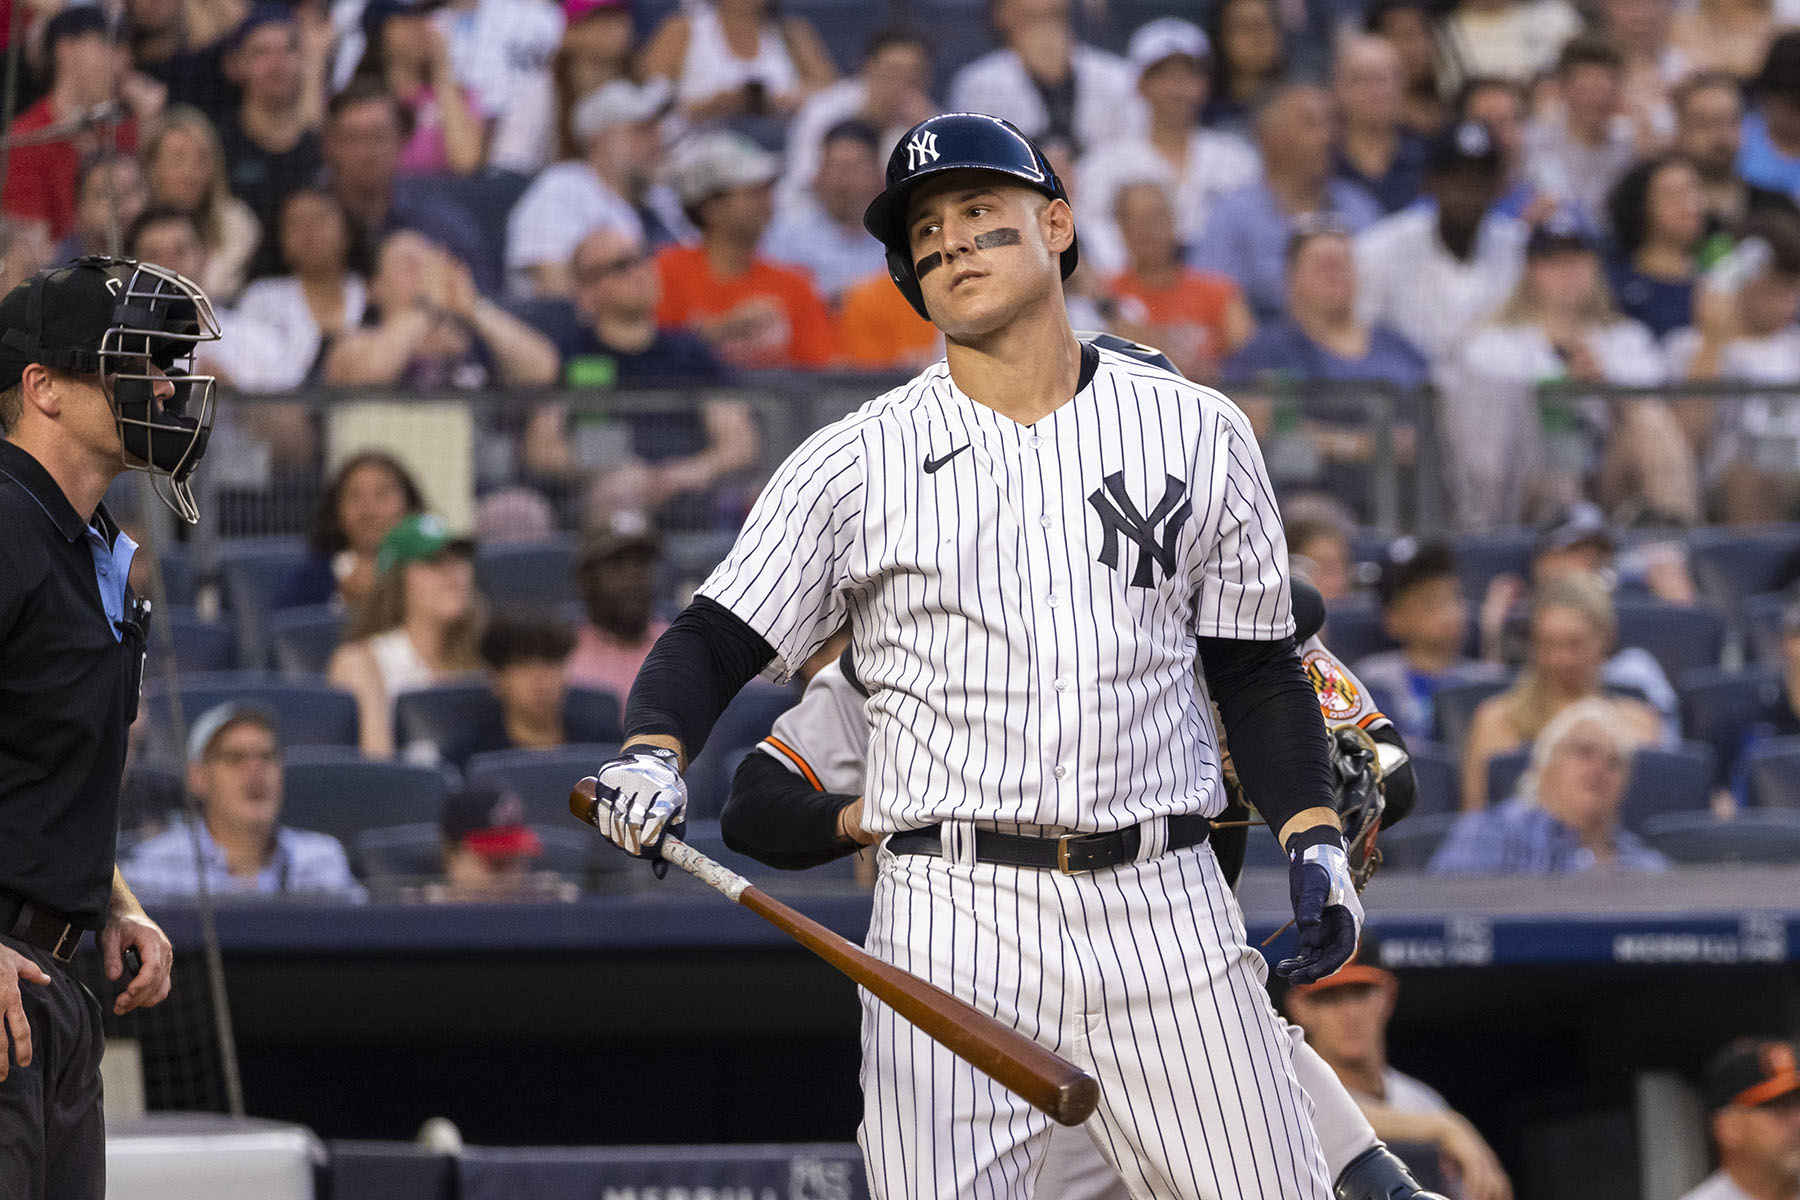 How To Watch Yankees Vs. Rays Tonight, August 1st